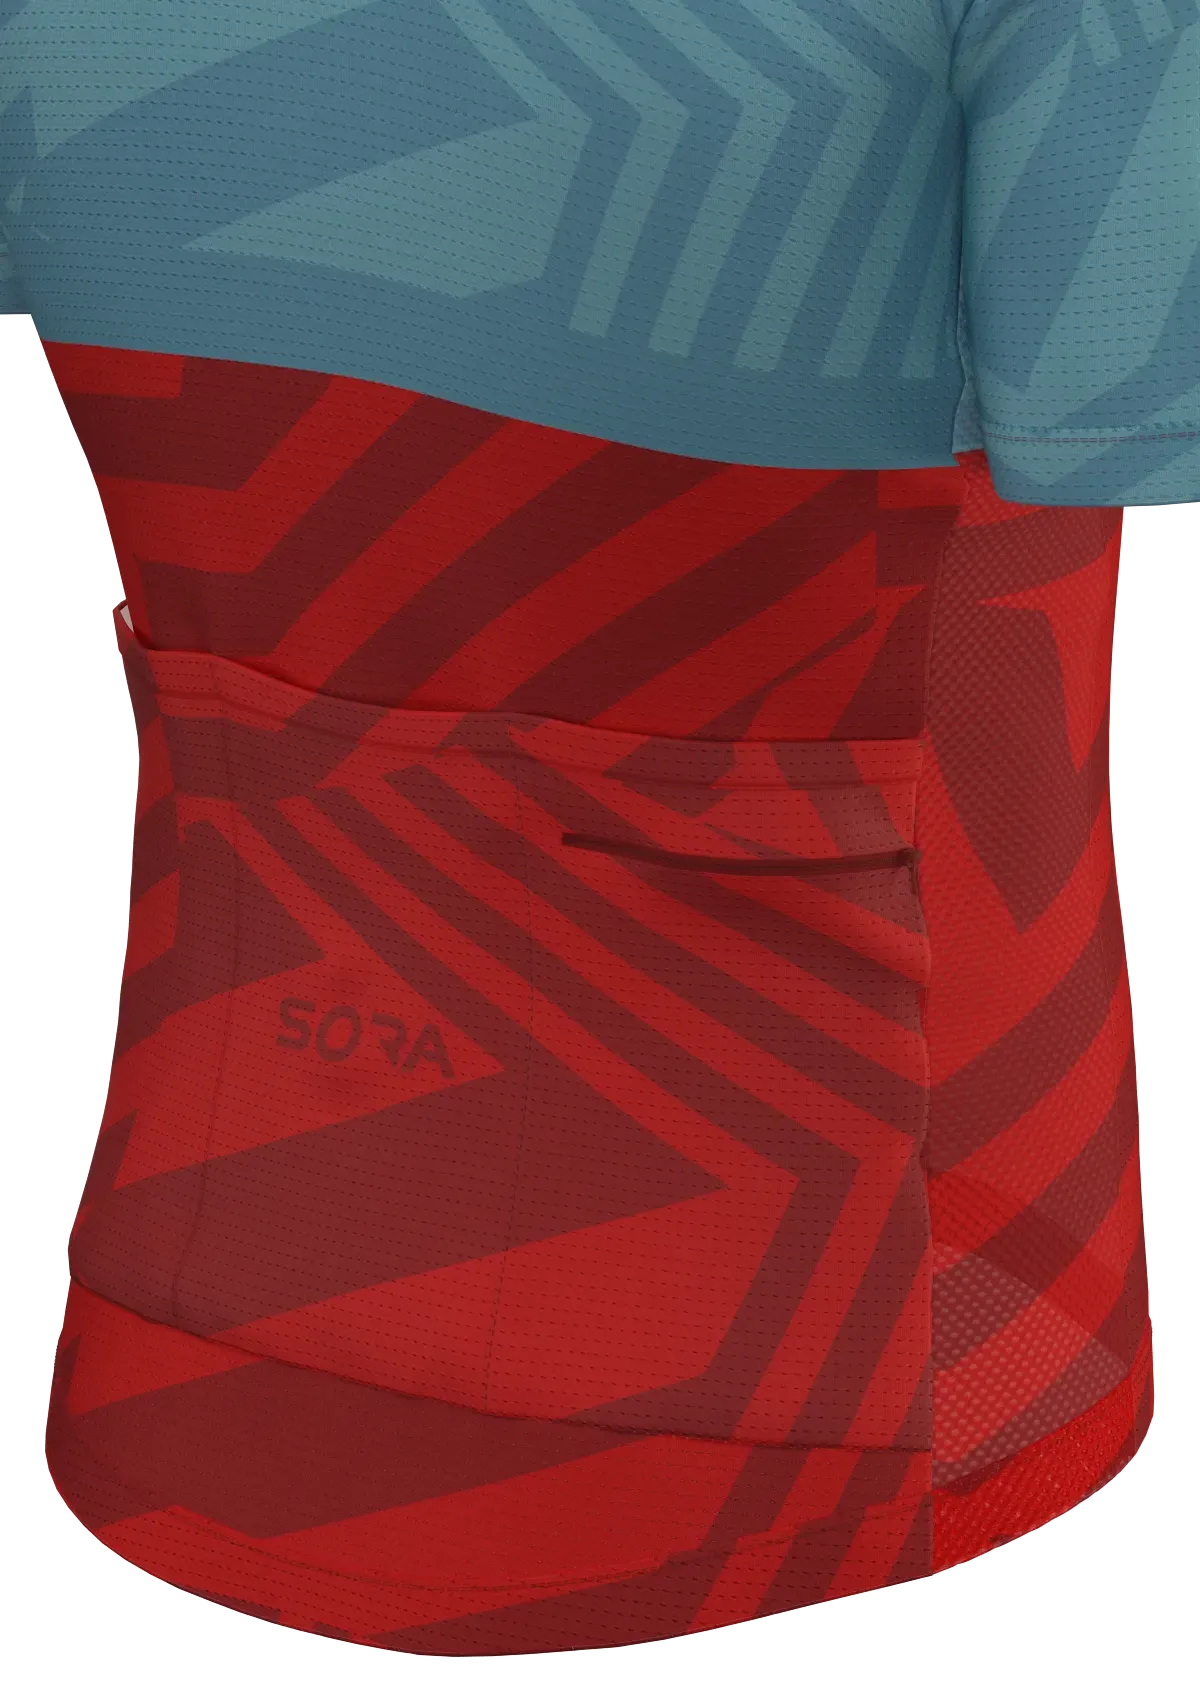 Regular Ice-Blue Red cycling jersey